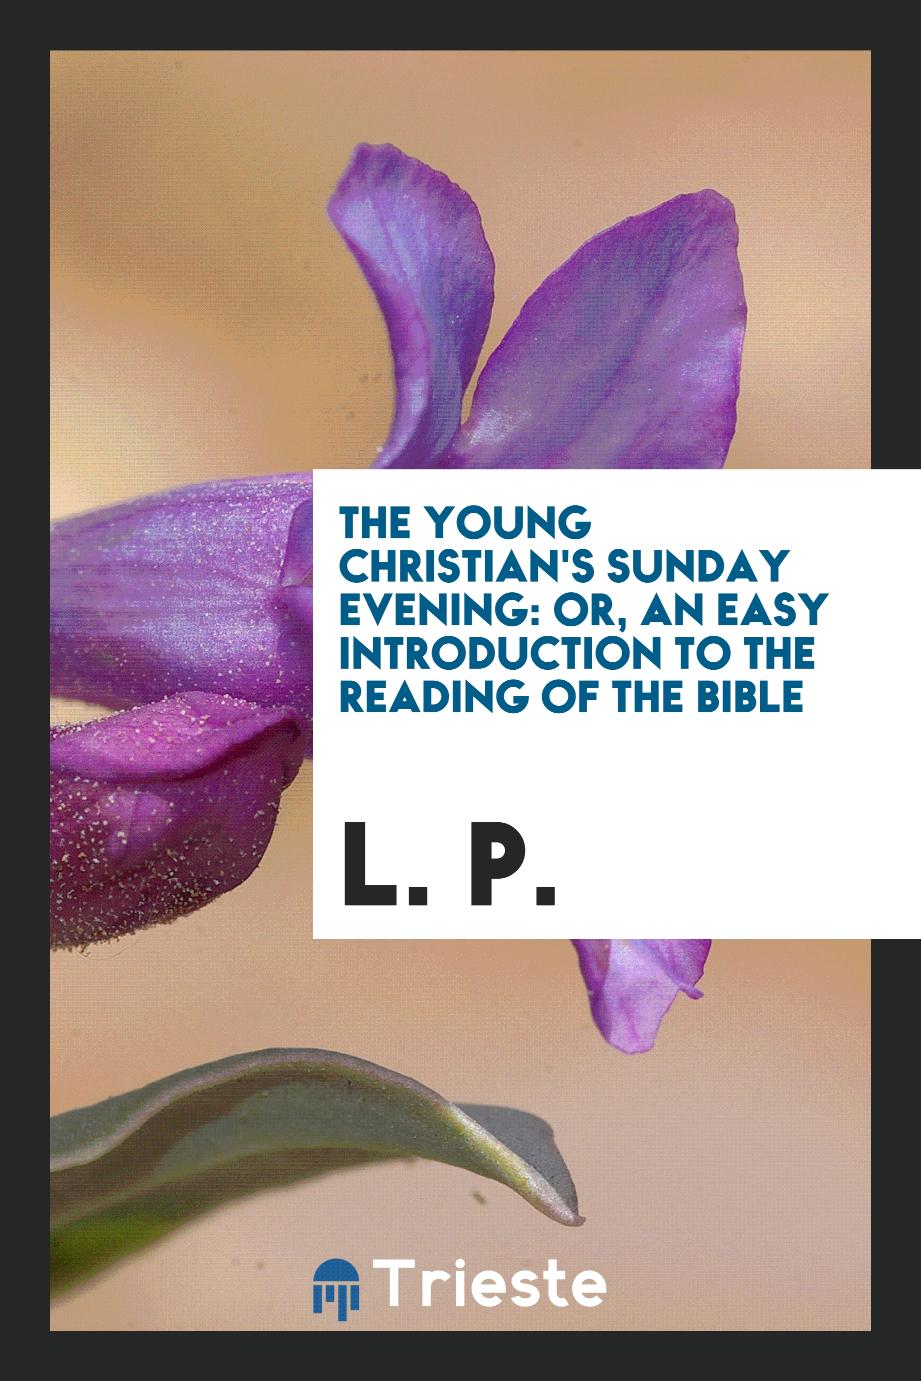 The Young Christian's Sunday Evening: Or, an Easy Introduction to the Reading of the Bible